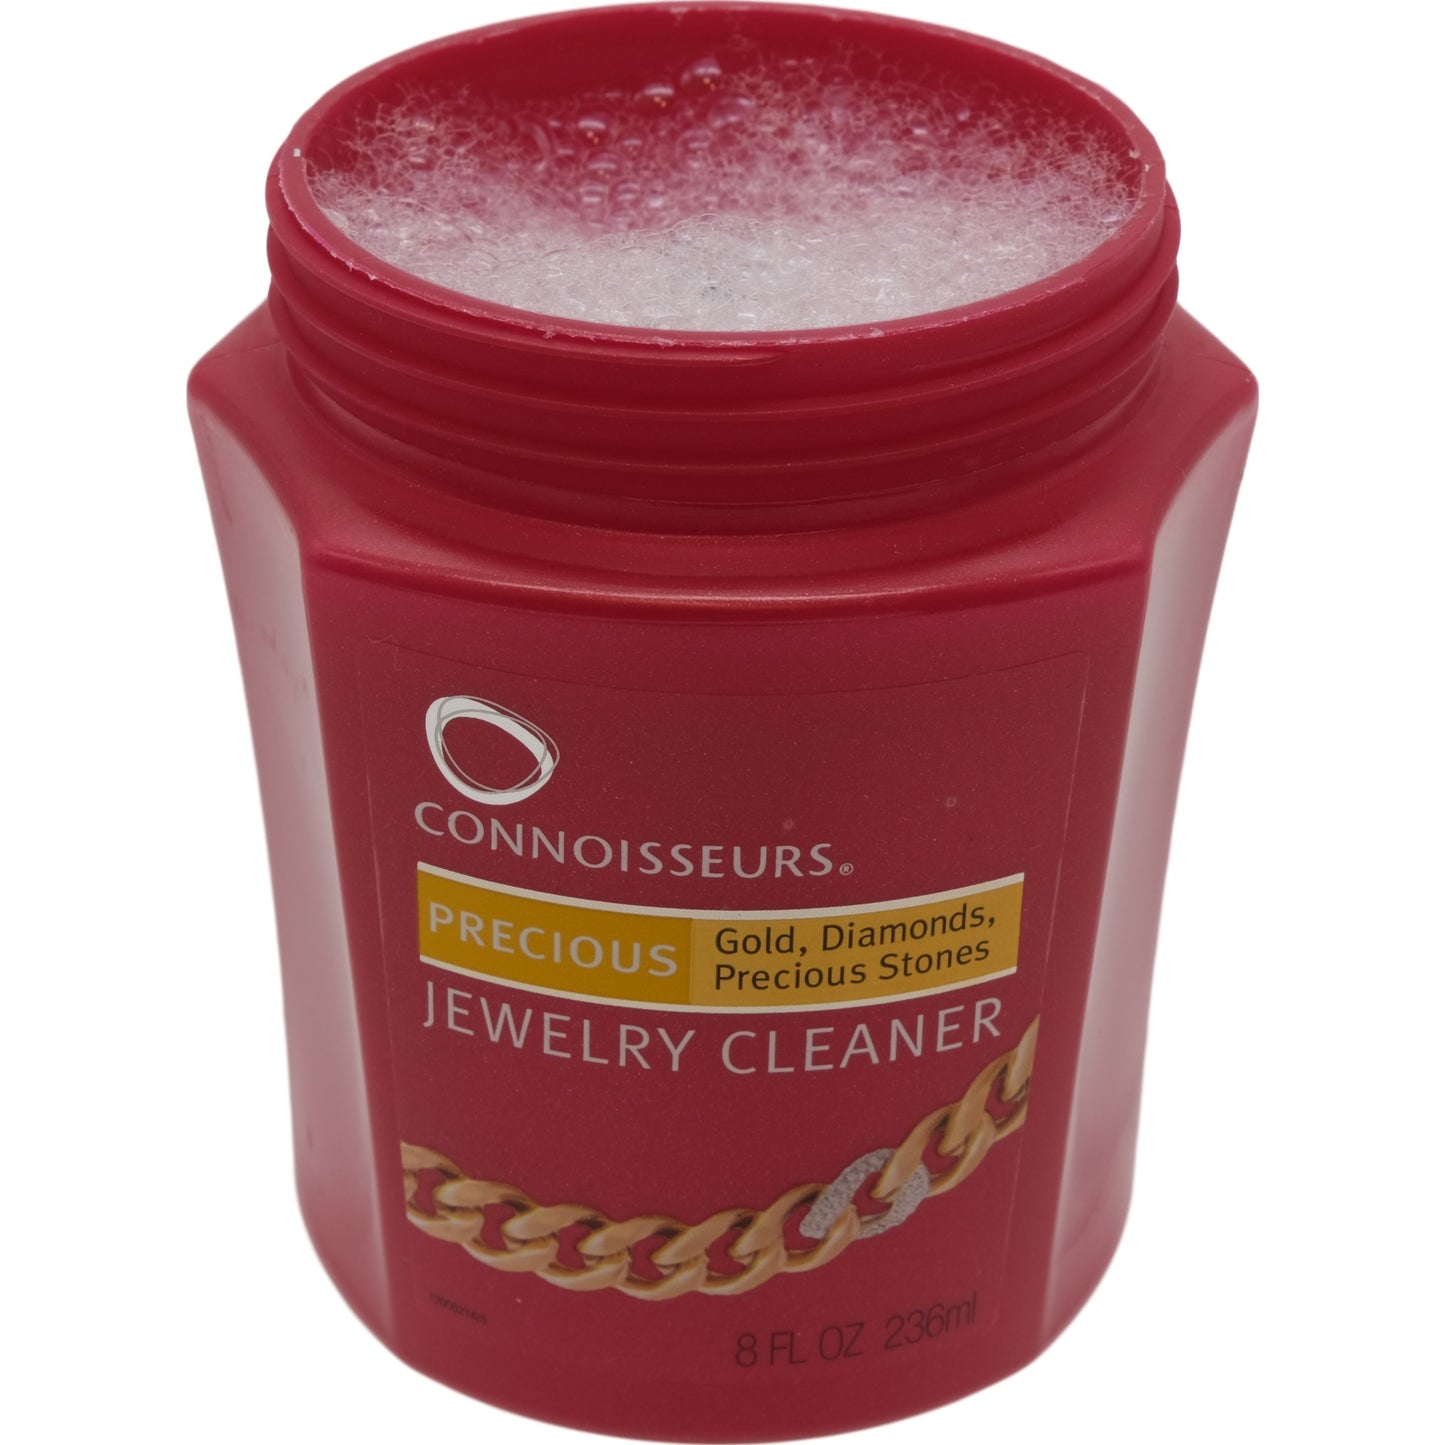 Connoisseurs Jewelry Cleaner 8 fl oz